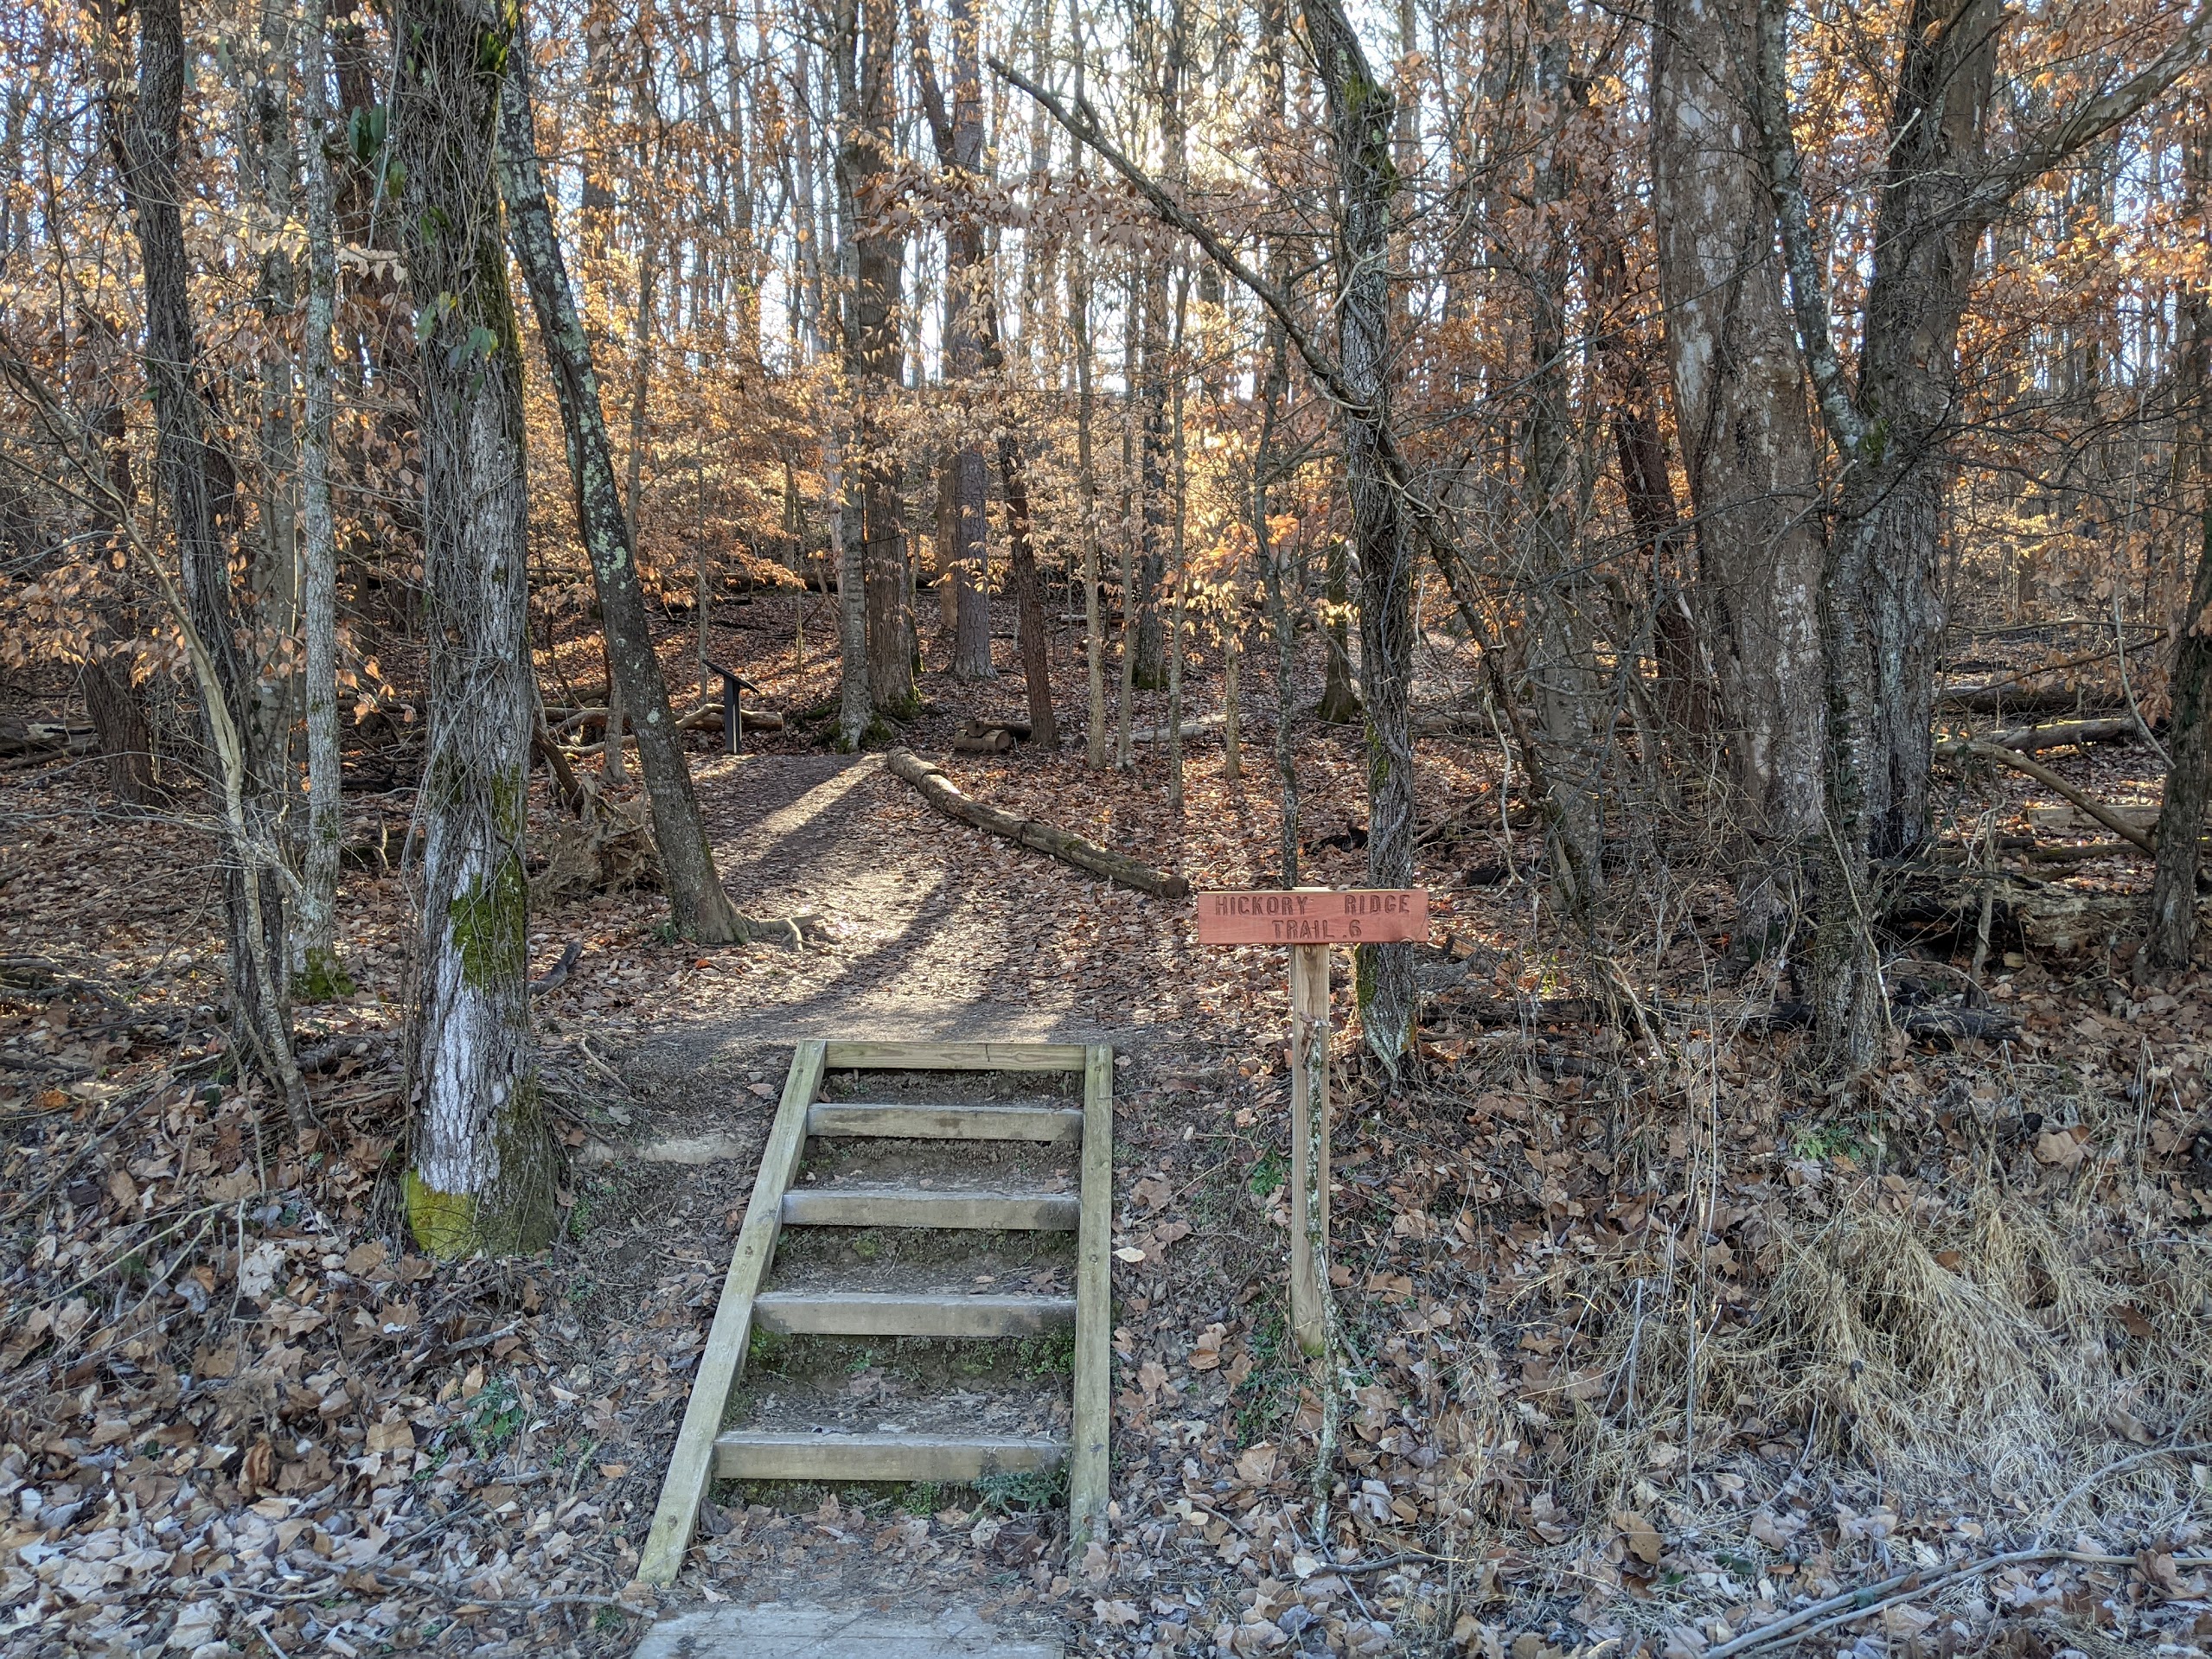 The Start of the Hickory Ridge Trail